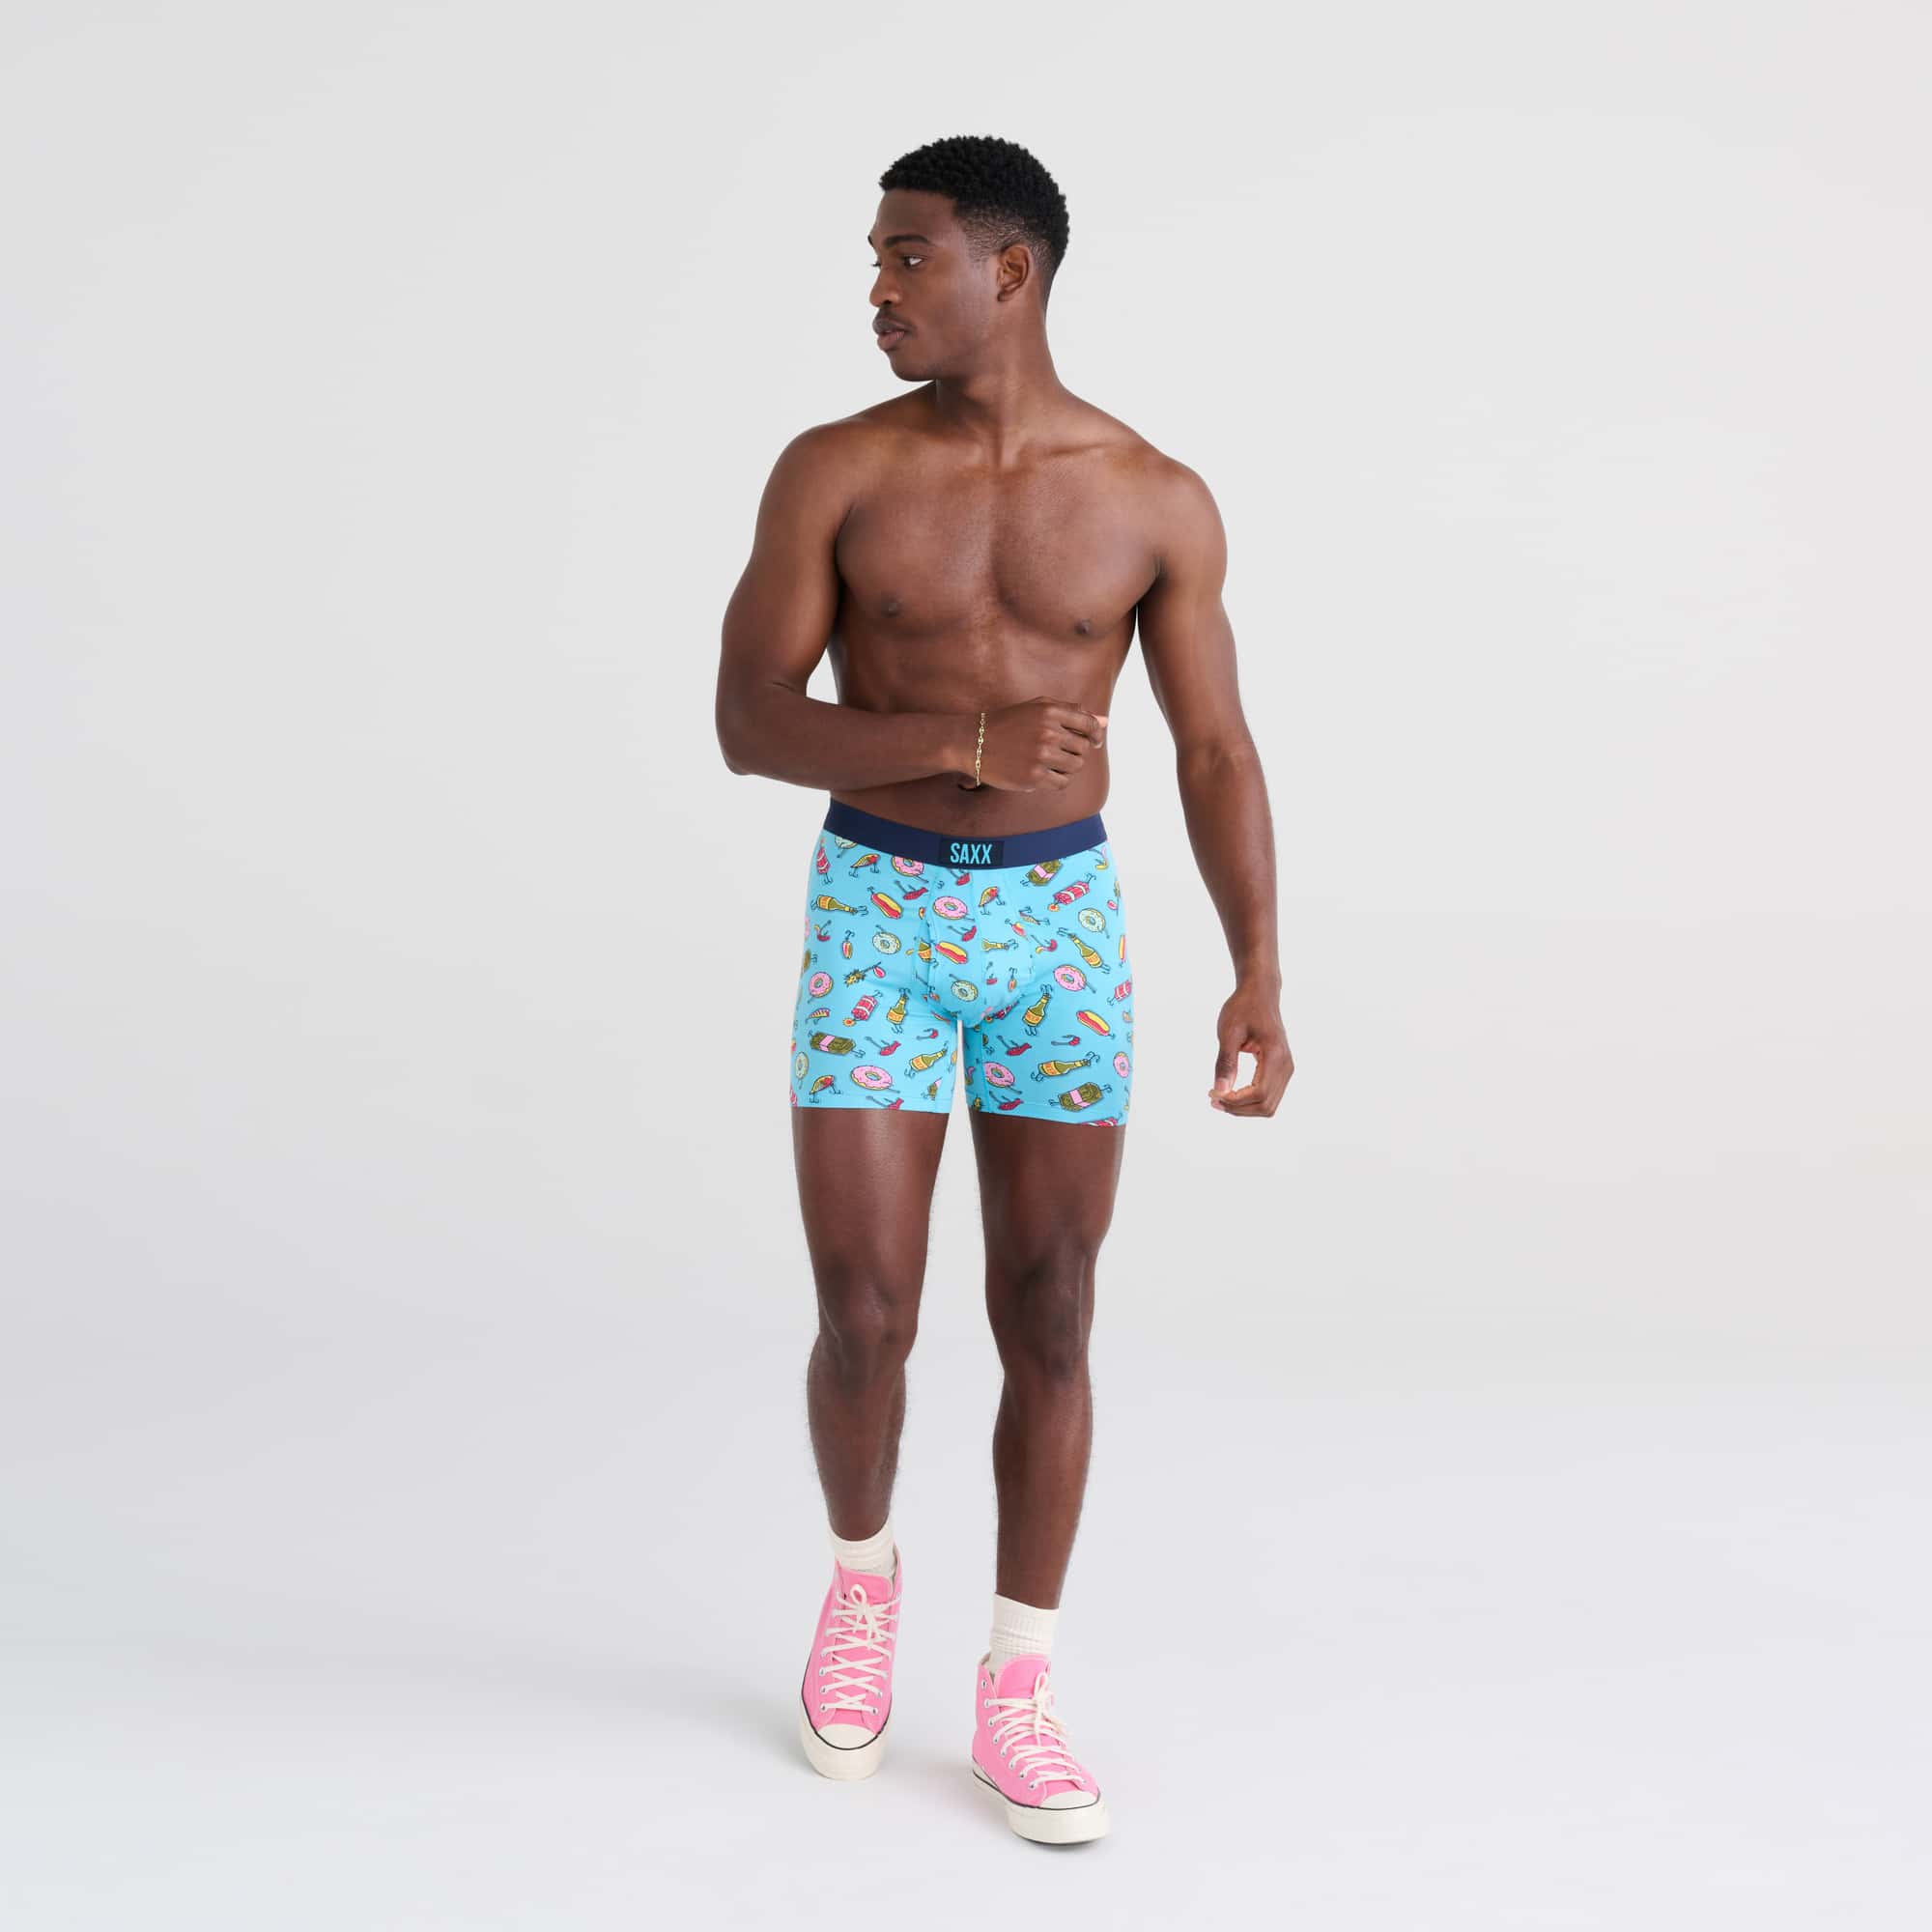 'SAXX Ultra Super Soft Boxer Brief - I'll Try Anything' in 'Maui' colour